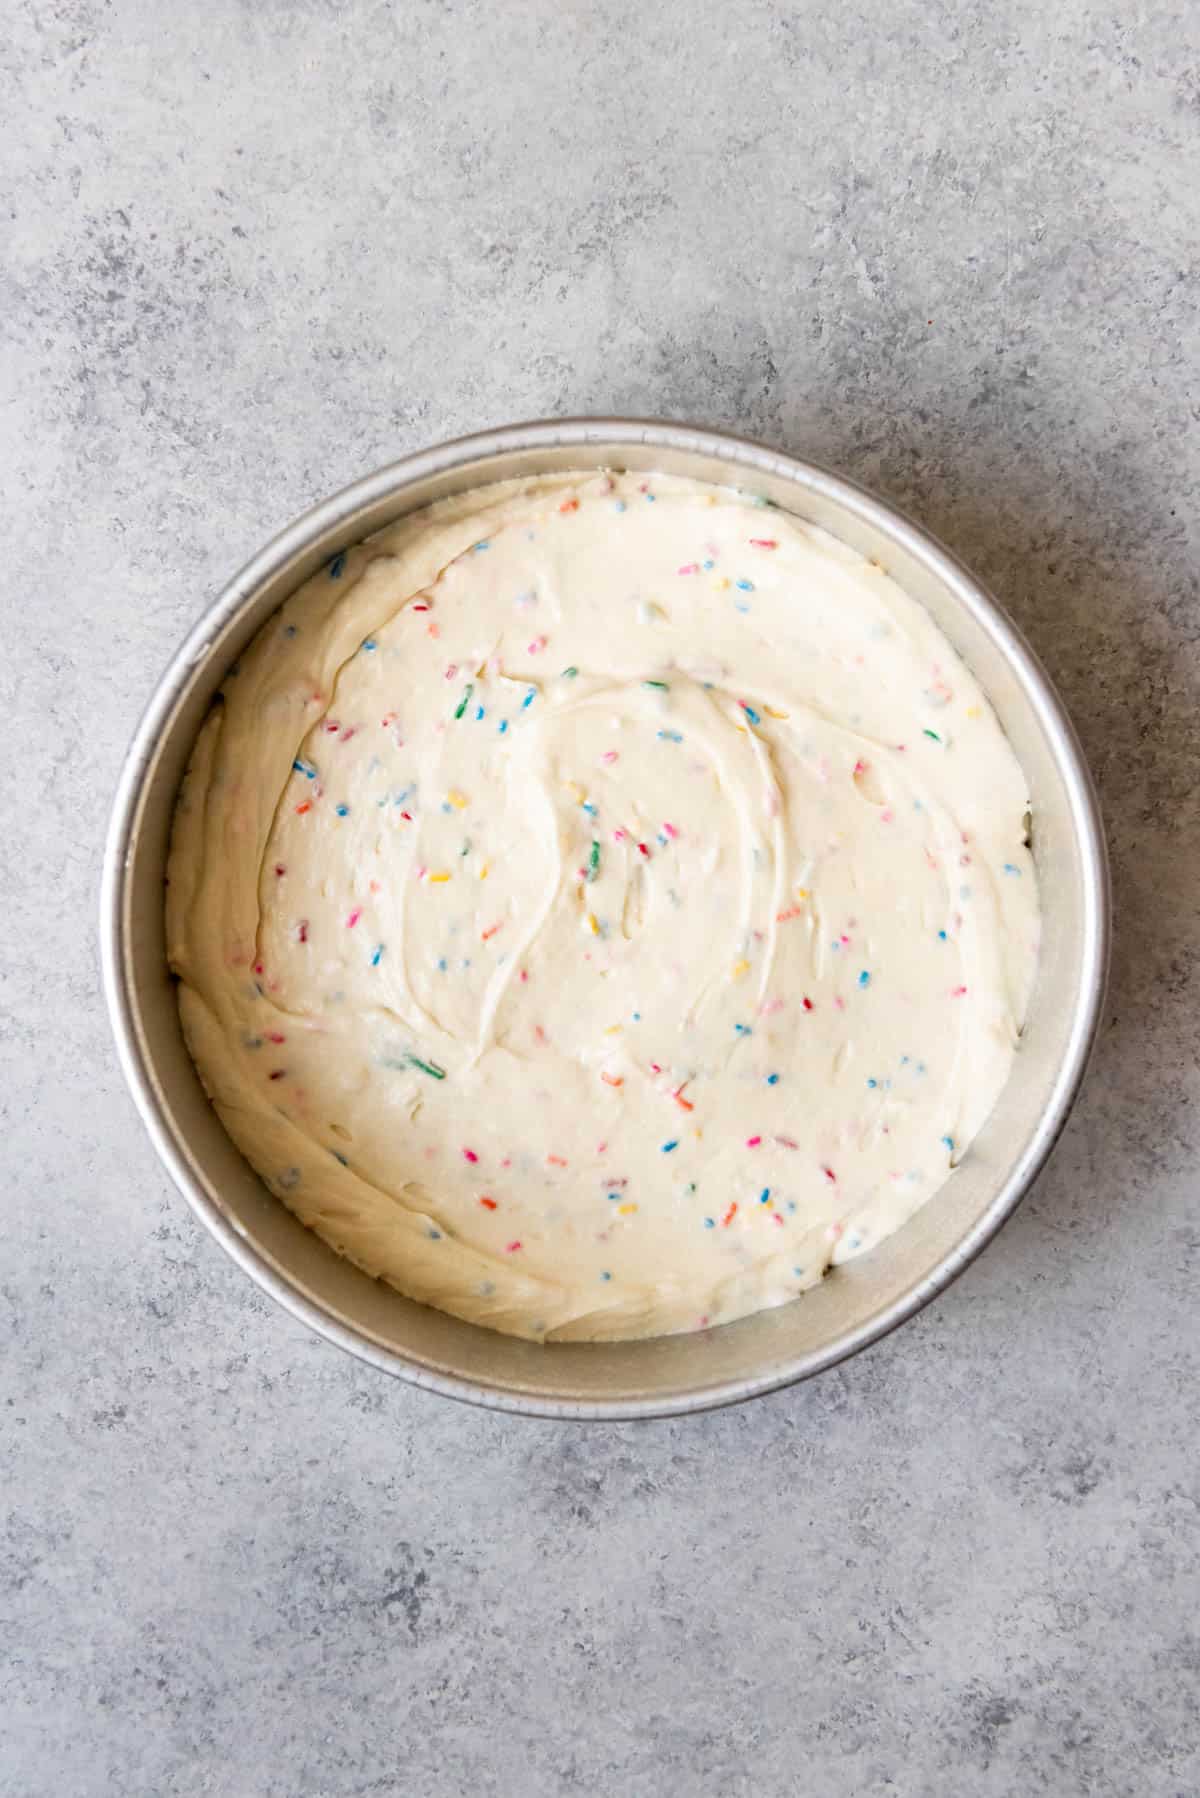 An image of Homemade funfetti cake mix in pan ready to bake.